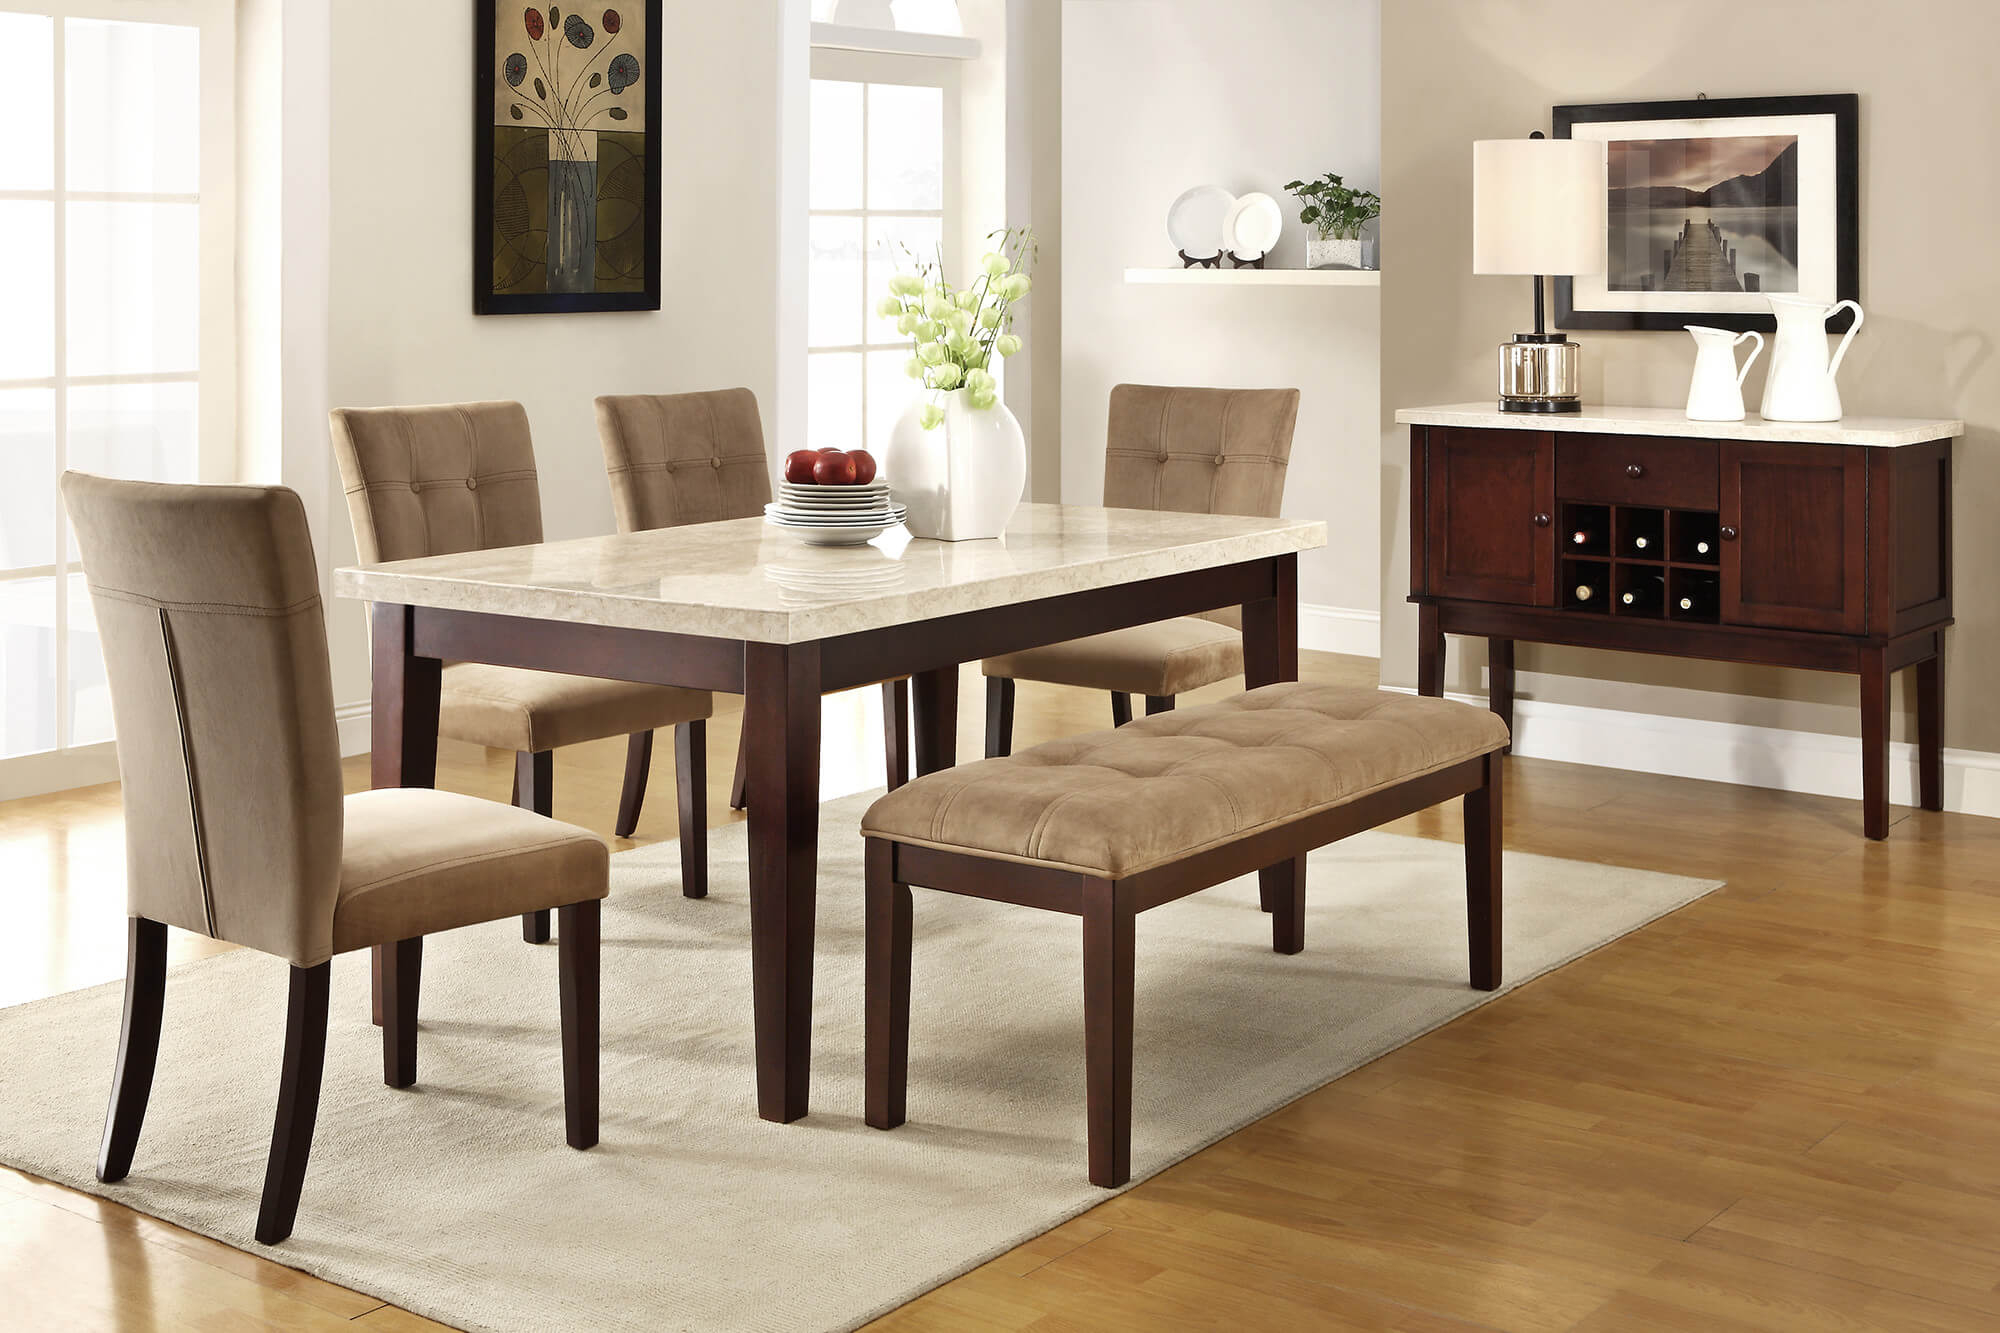 26 Dining Room Sets Big And Small With Bench Seating 2020 pertaining to dimensions 2000 X 1333